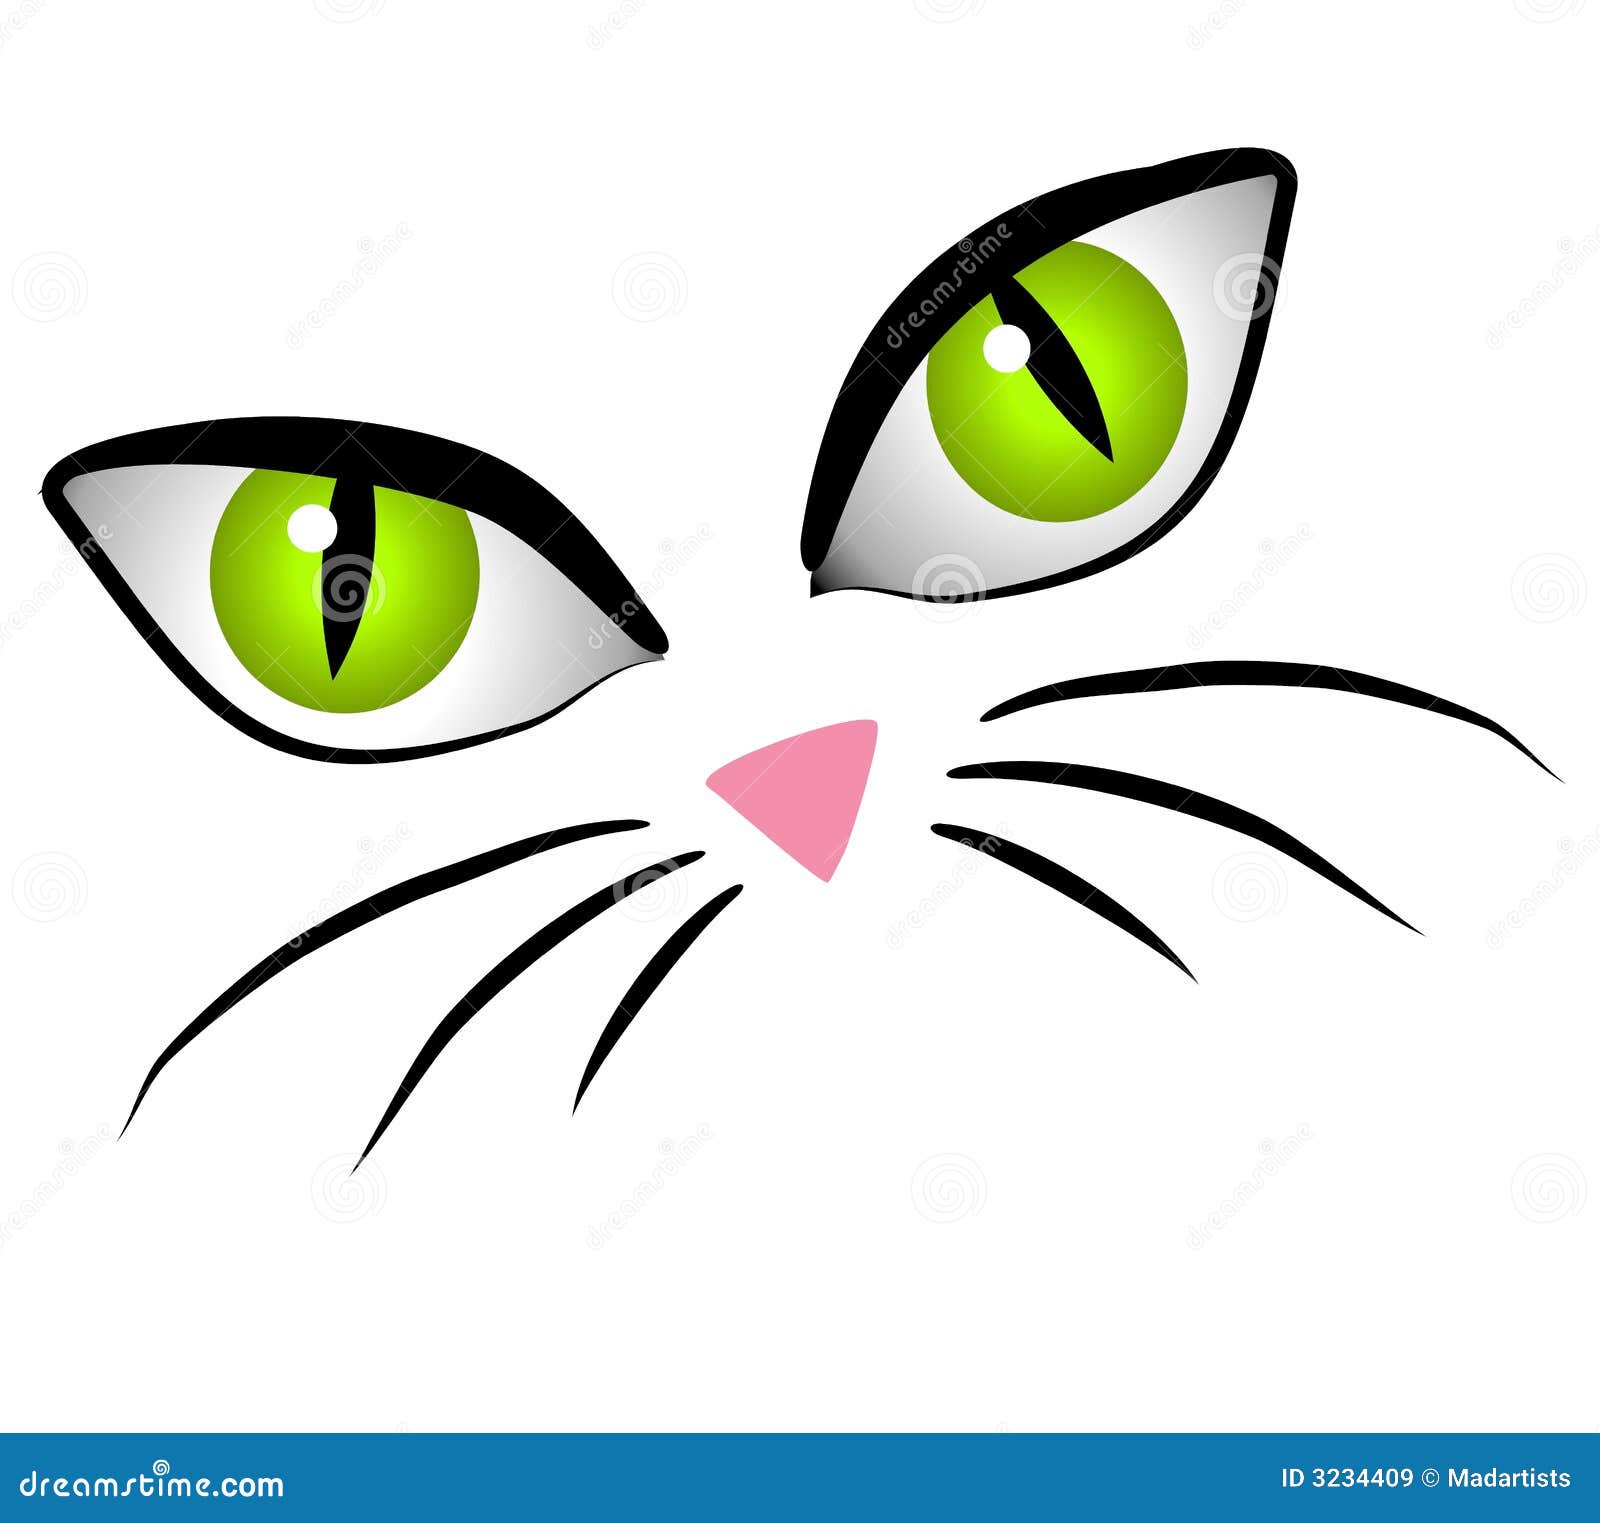 clipart anime chat - photo #10